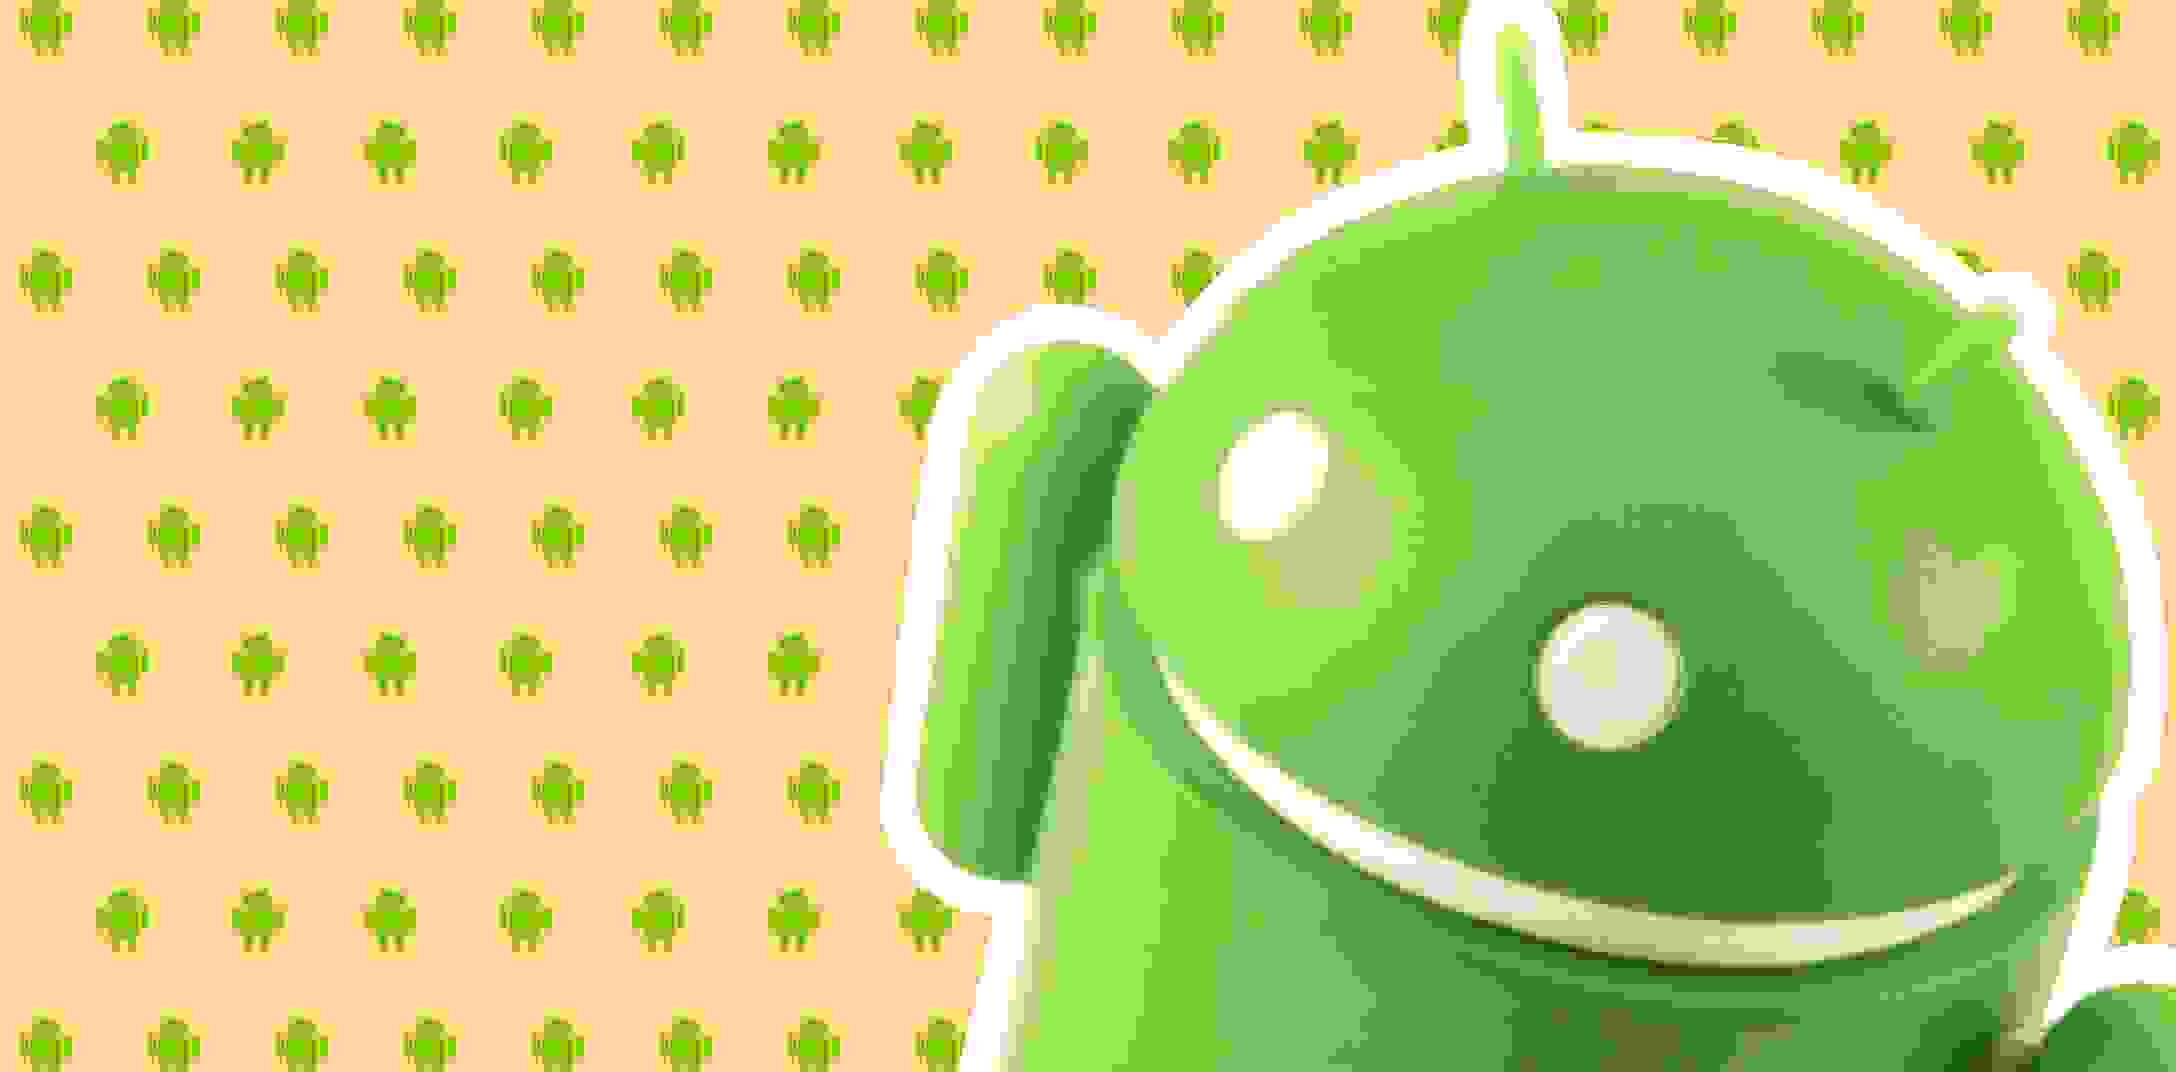 Android official character on the yellow background